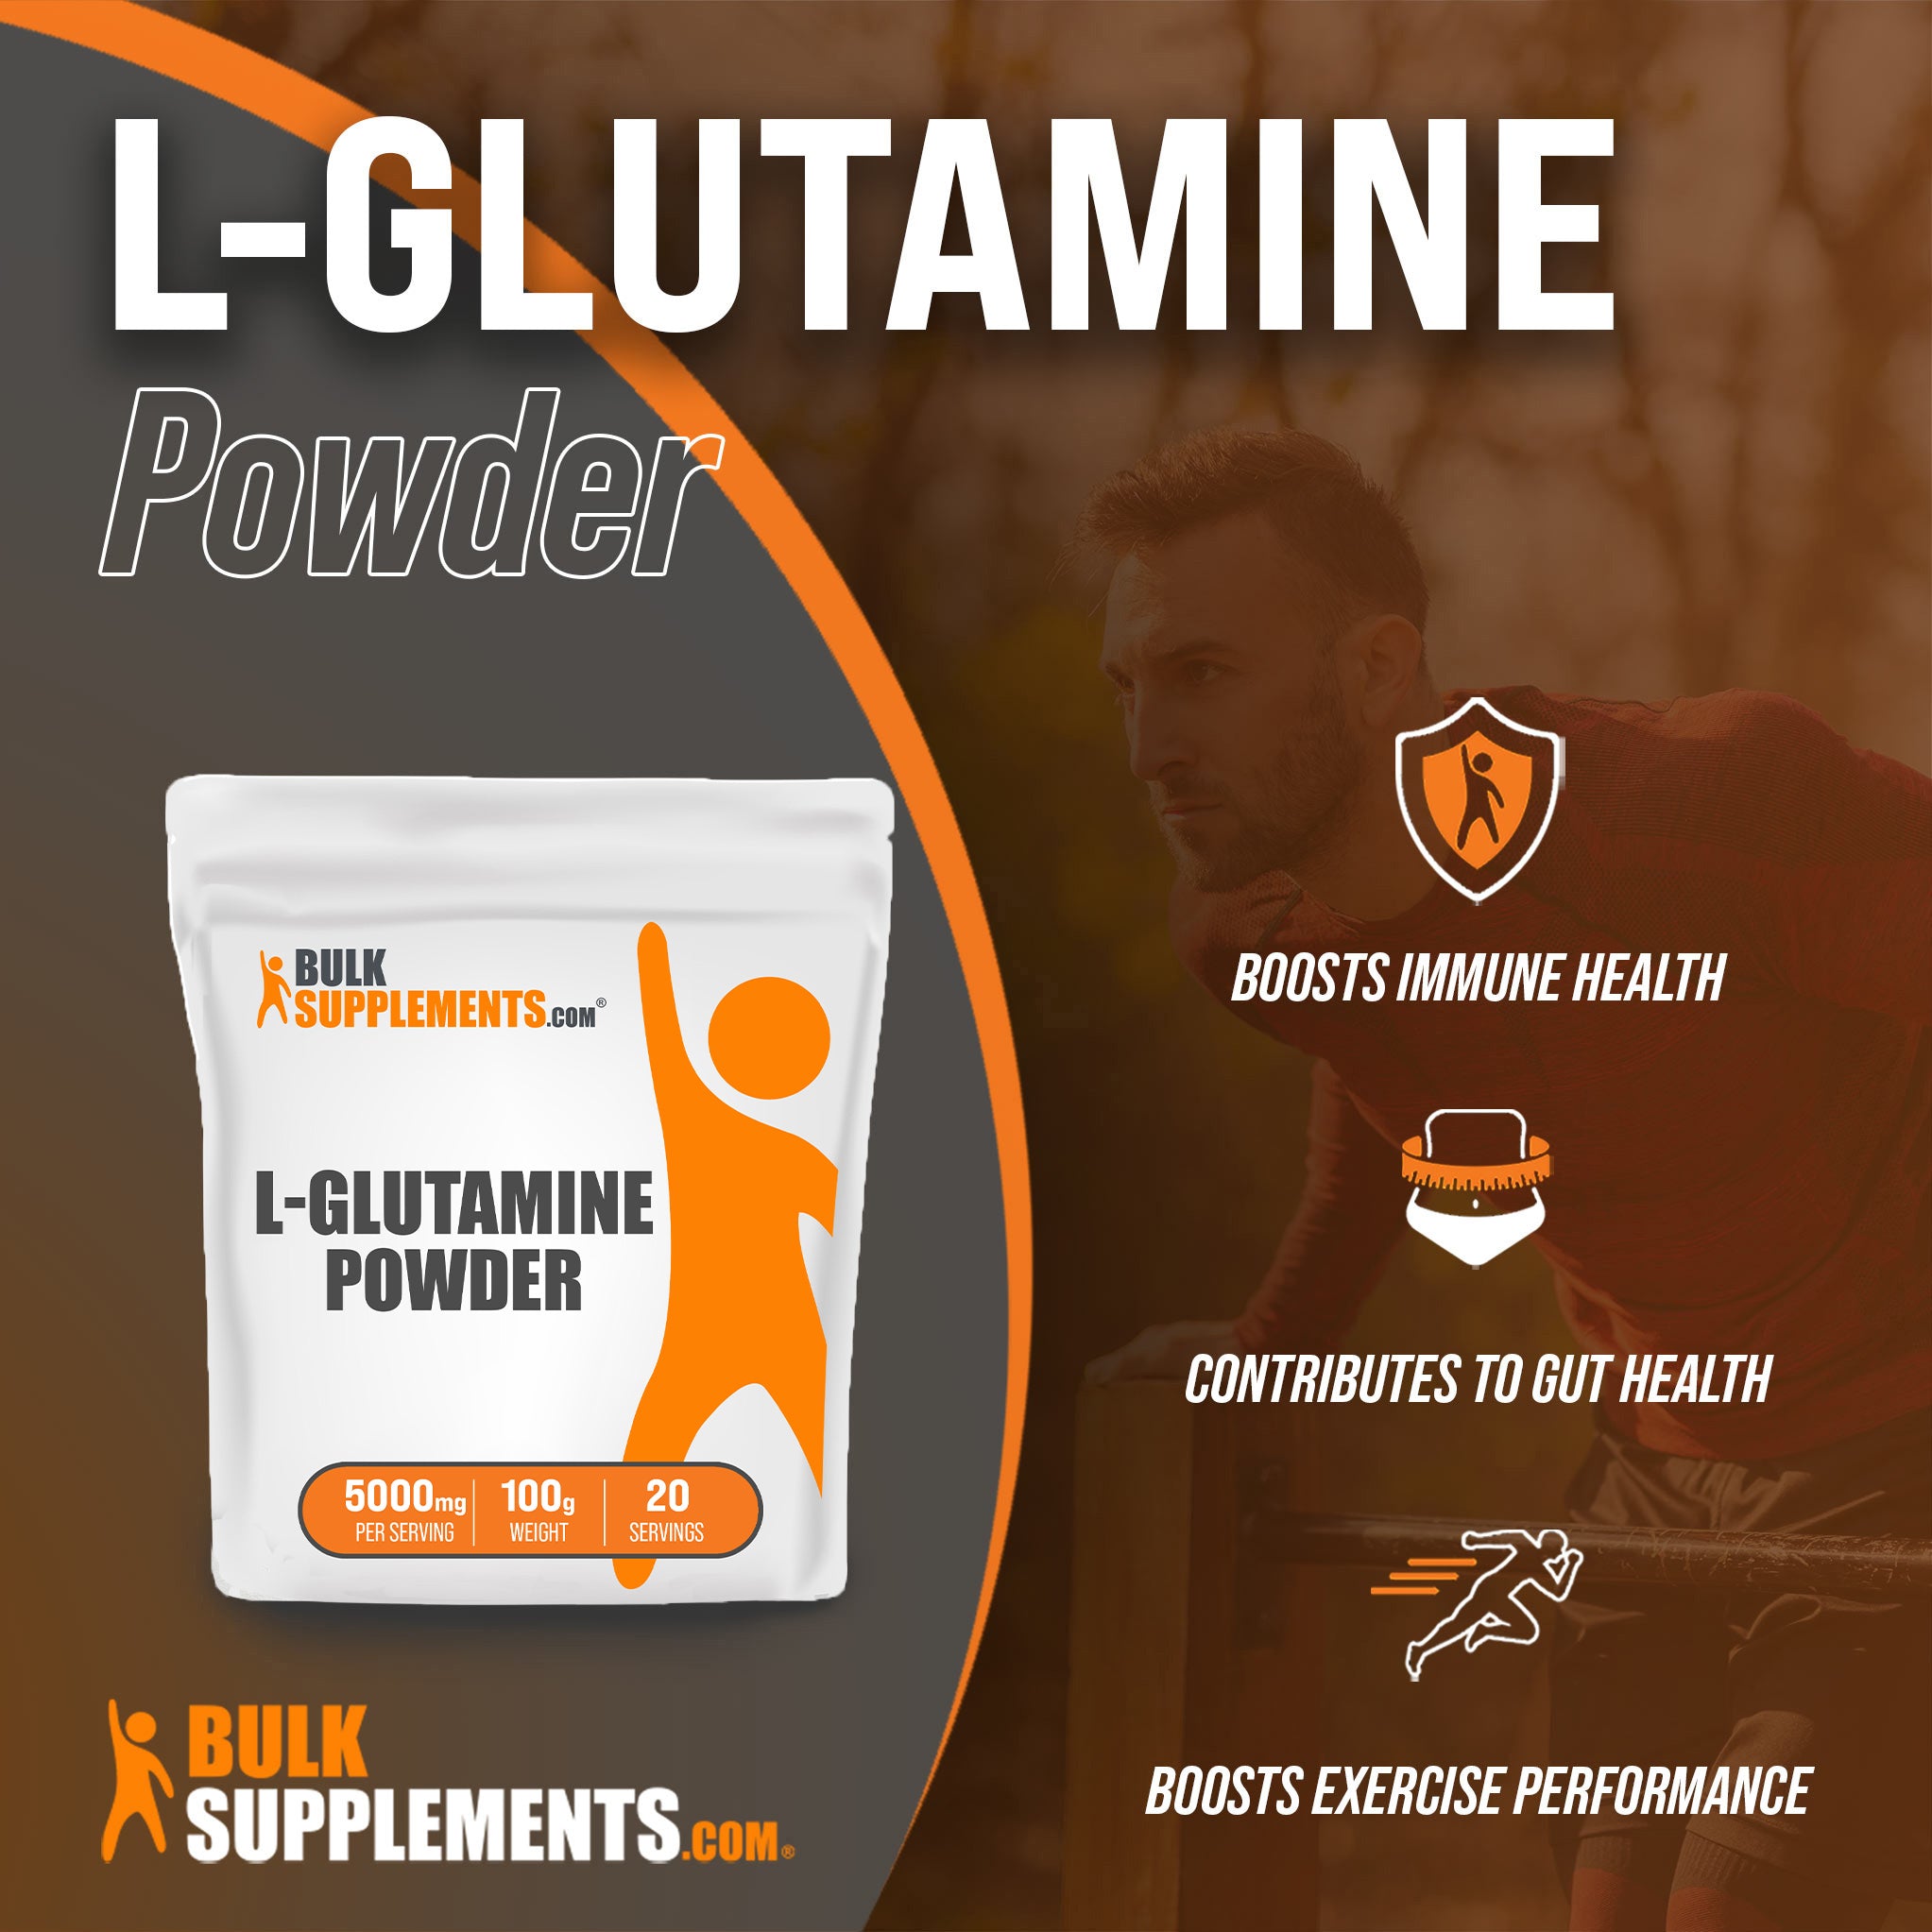 Benefits of L-Glutamine: boosts immune health, contributes to gut health, boosts exercise performance